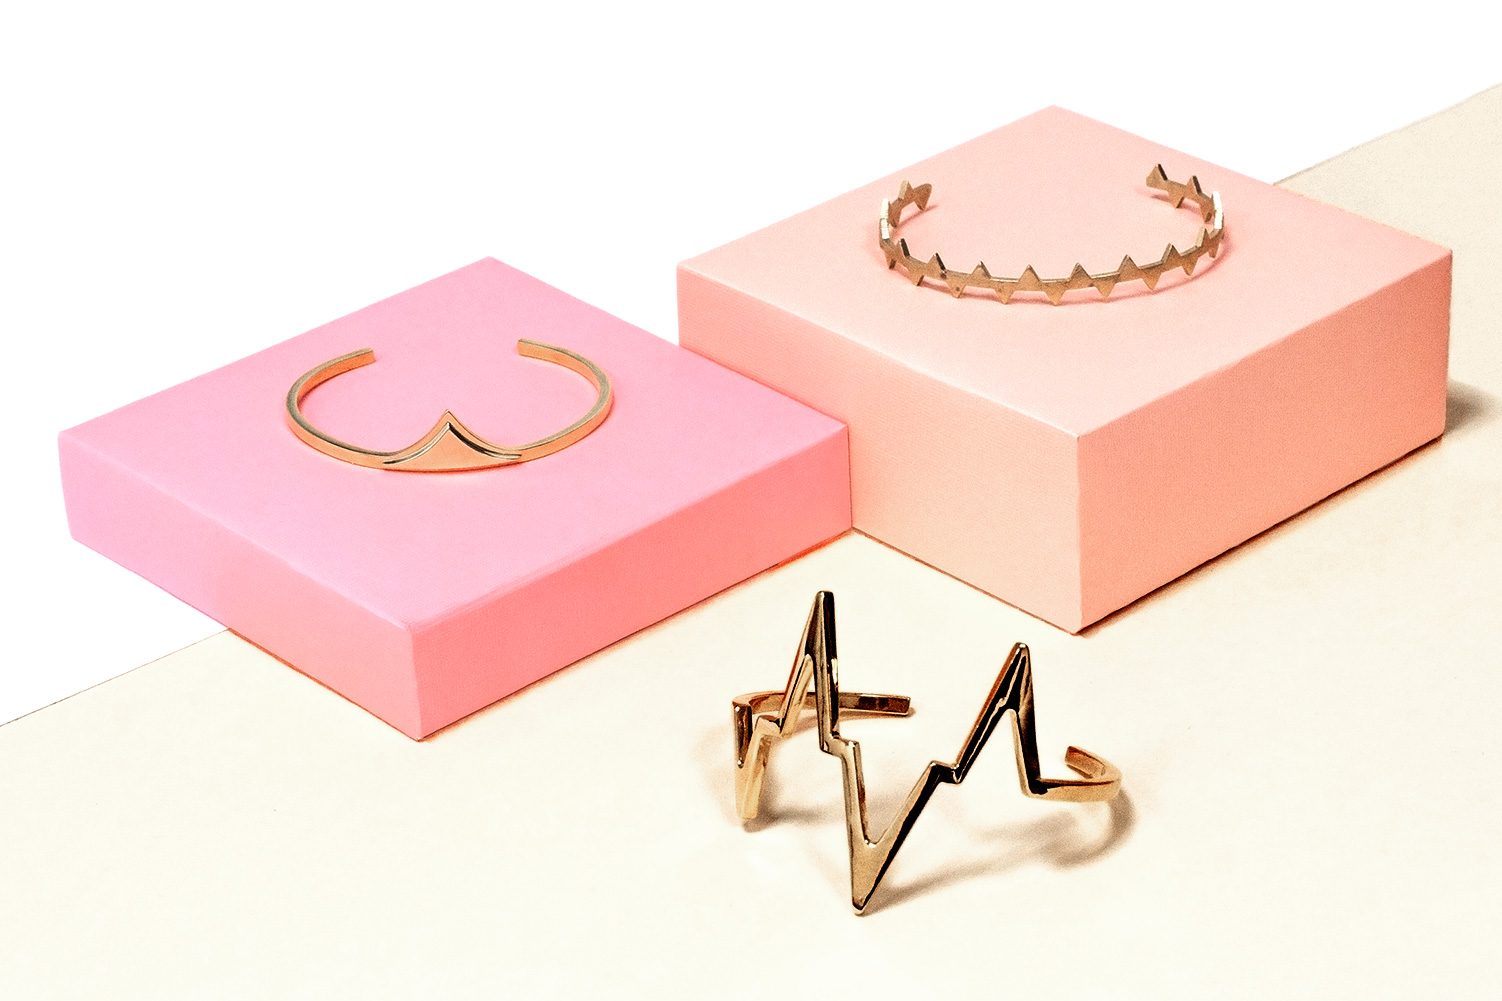 you can design and 3d print your own gold silver jewelry with trove bracelets banner pink 2